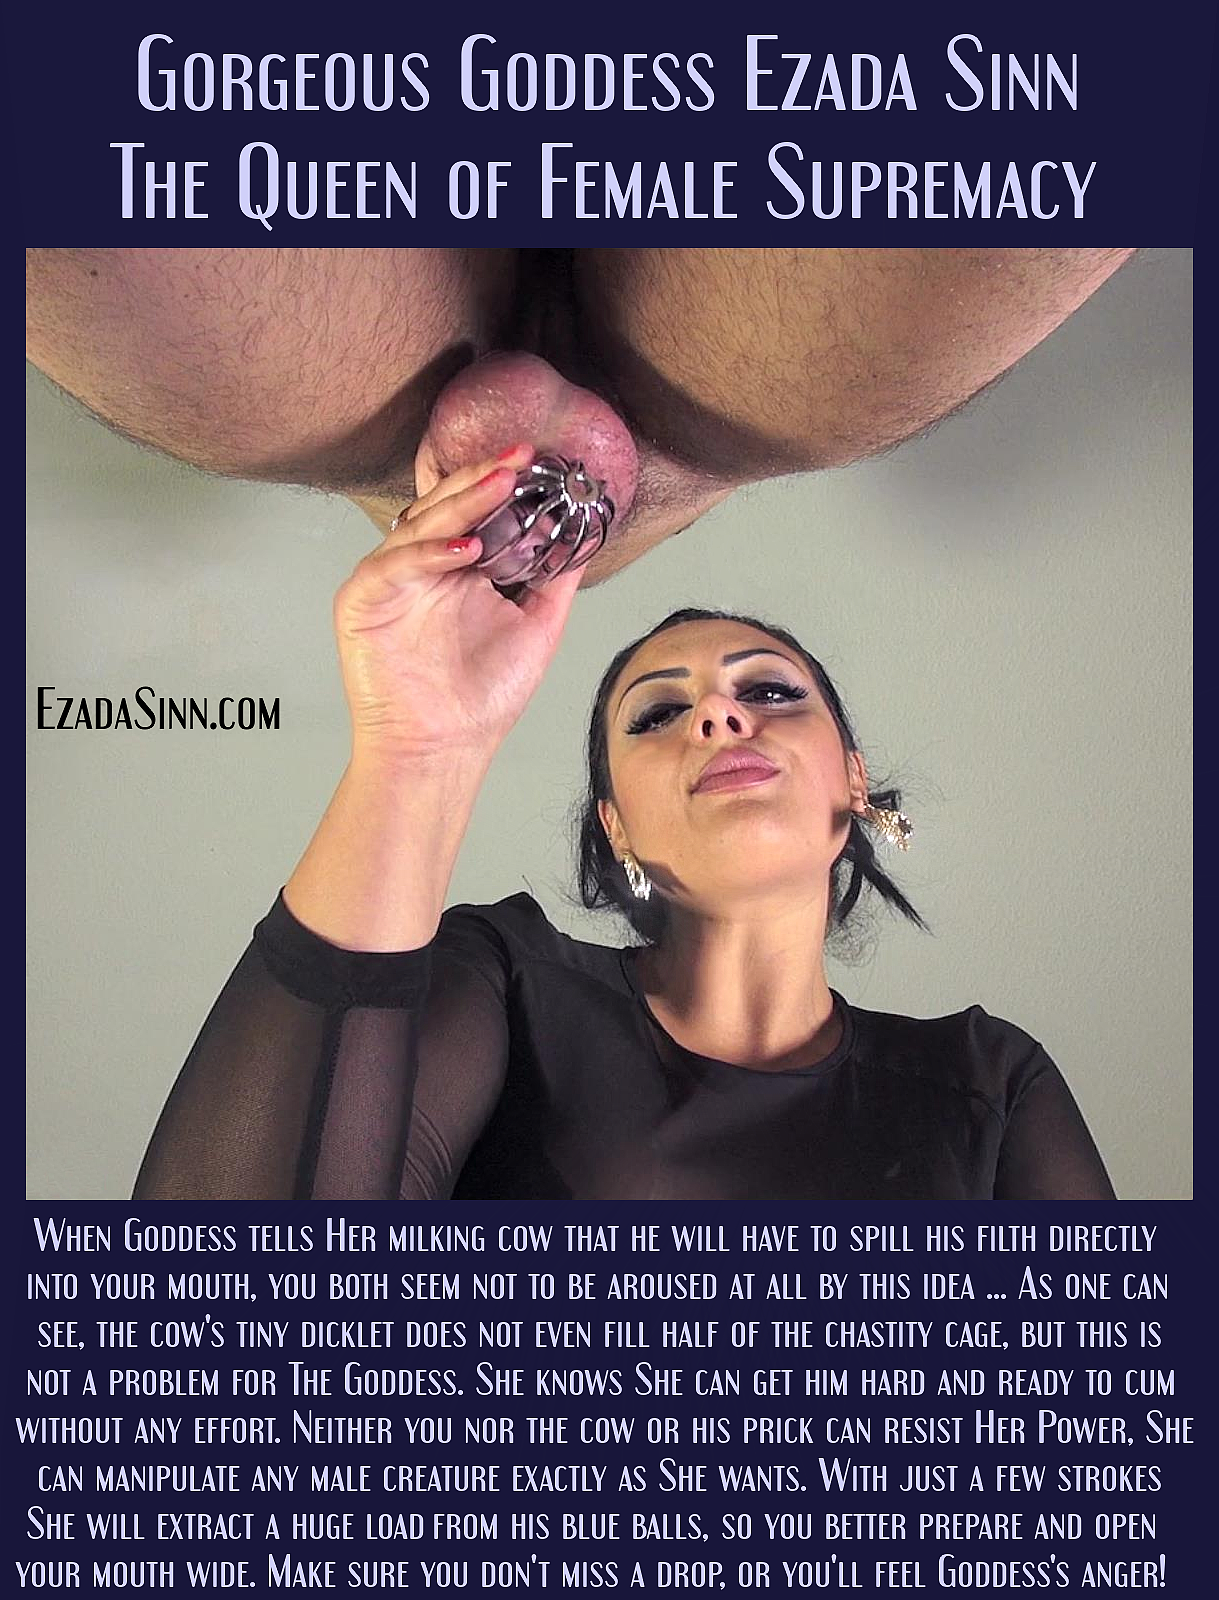 Photo by sluga0201 with the username @sluga0201,  July 25, 2020 at 10:51 AM. The post is about the topic Captions of Matriarch Ezada's great clips and the text says 'Worship Matriarch @Ezada Sinn, The Gorgeous Goddess of #FemaleSupremacy! Follow Her on twitter (twitter.com/Mistress_Ezada), obey Her orders on onlyfans (onlyfans.com/mistress_ezada), buy Her Clips on clips4sale (EzadaSinn.com and SinnClips.com)!..'